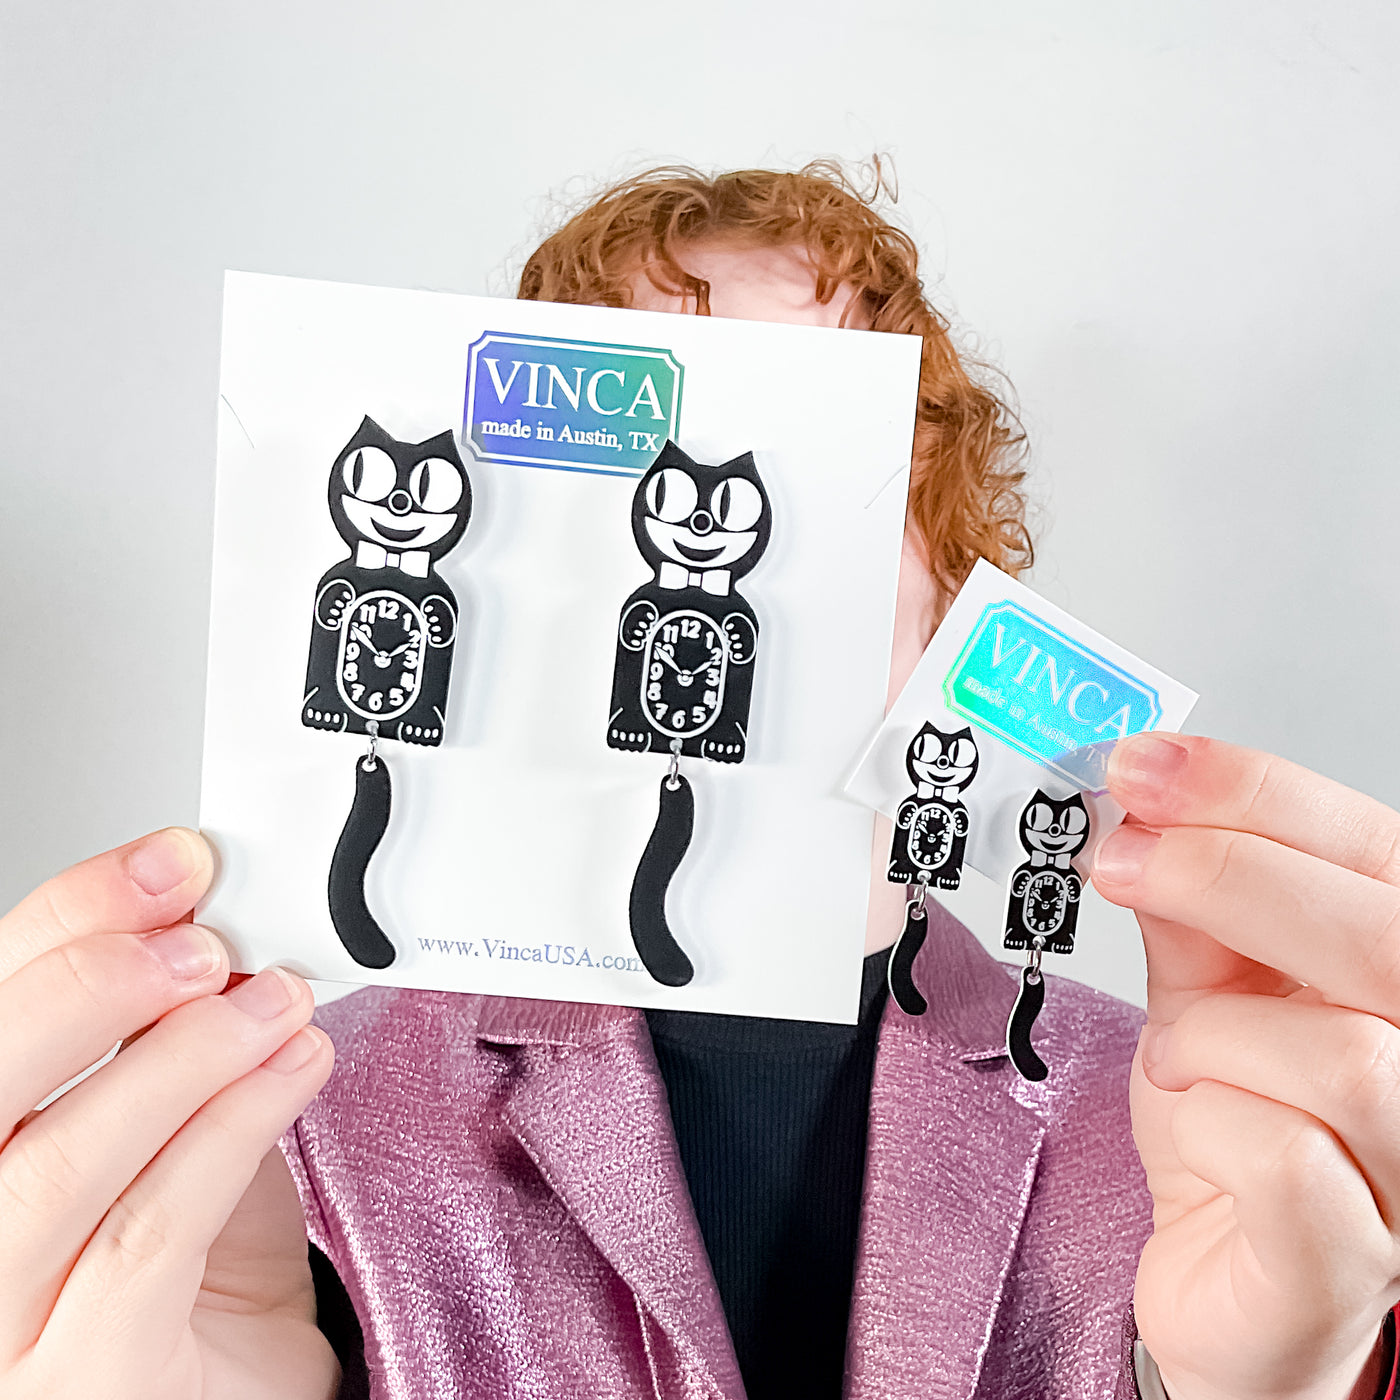 Extra large Kit-Cat Klock earrings versus small earrings held up by a young model with curly red hair.